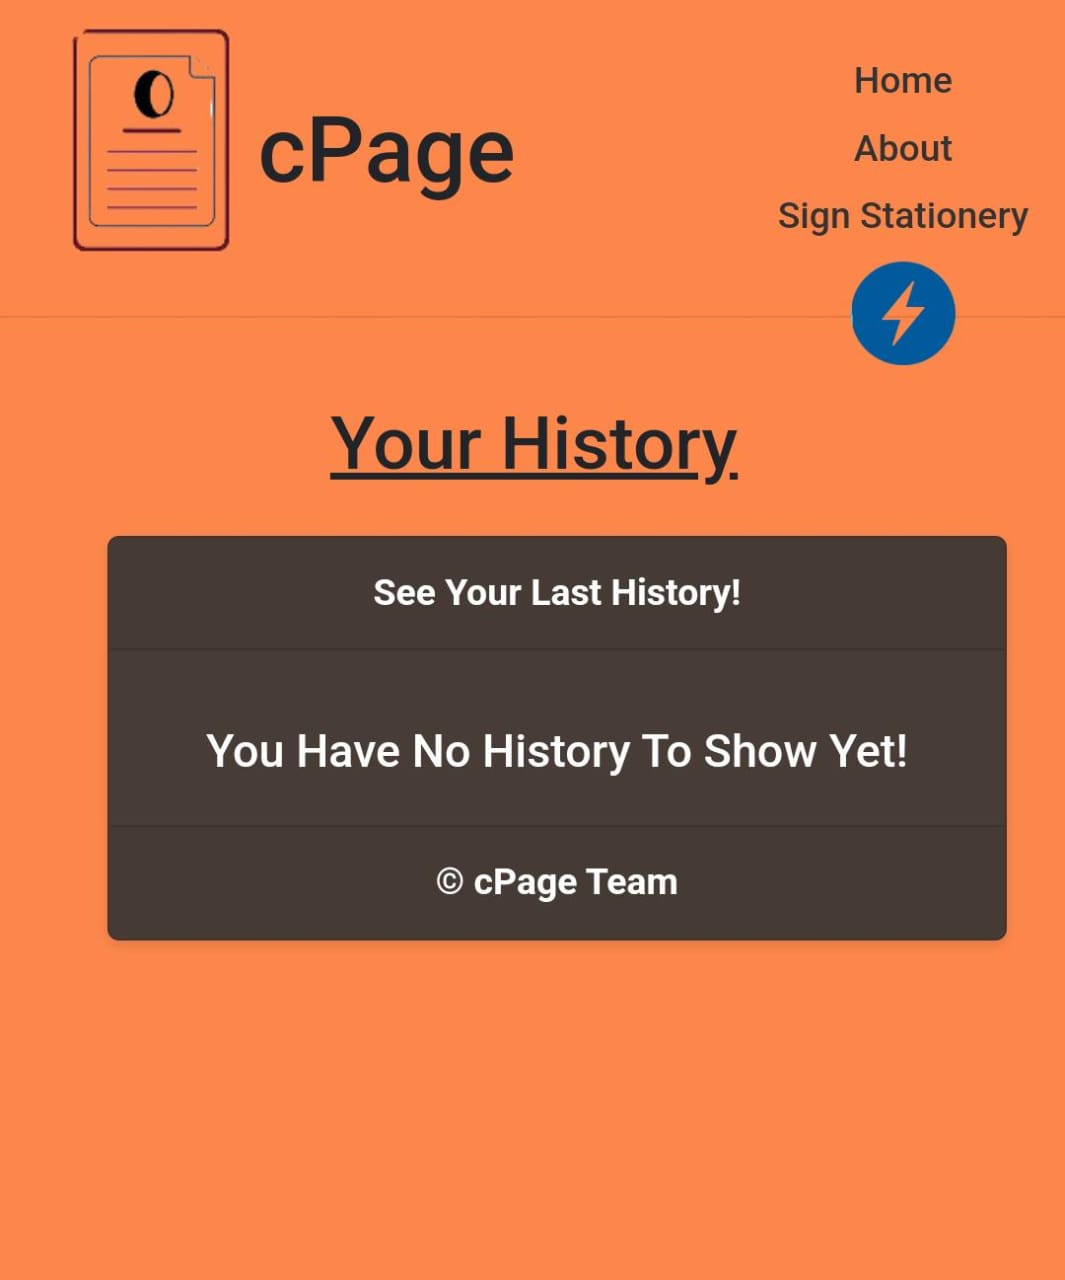 cPage your history Image 2